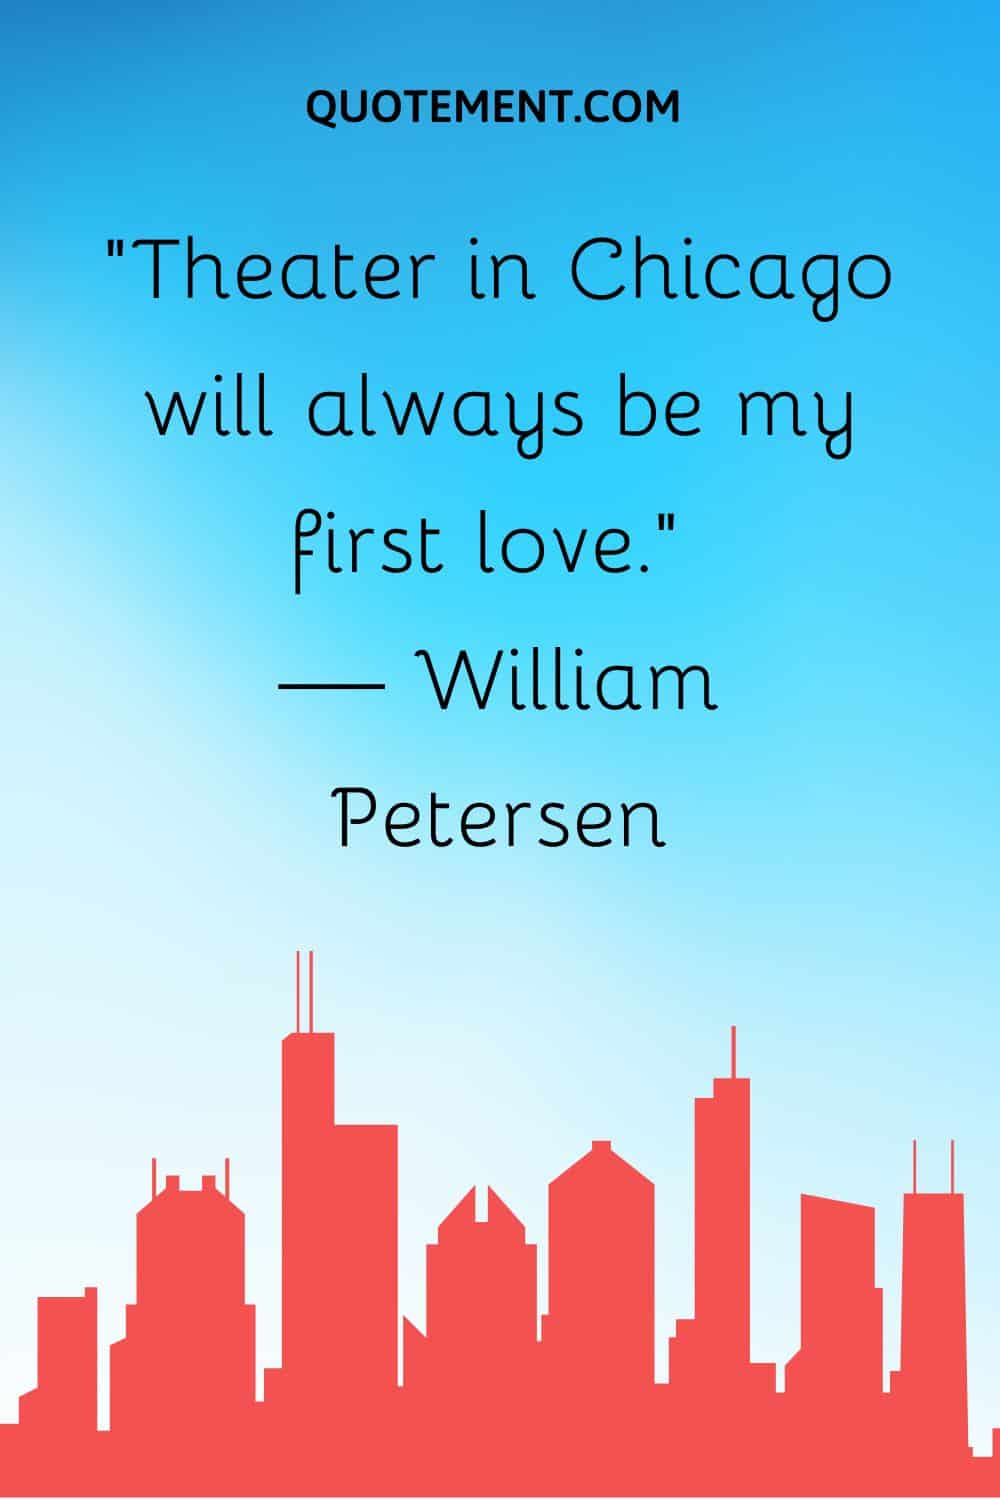 “Theater in Chicago will always be my first love.” — William Petersen